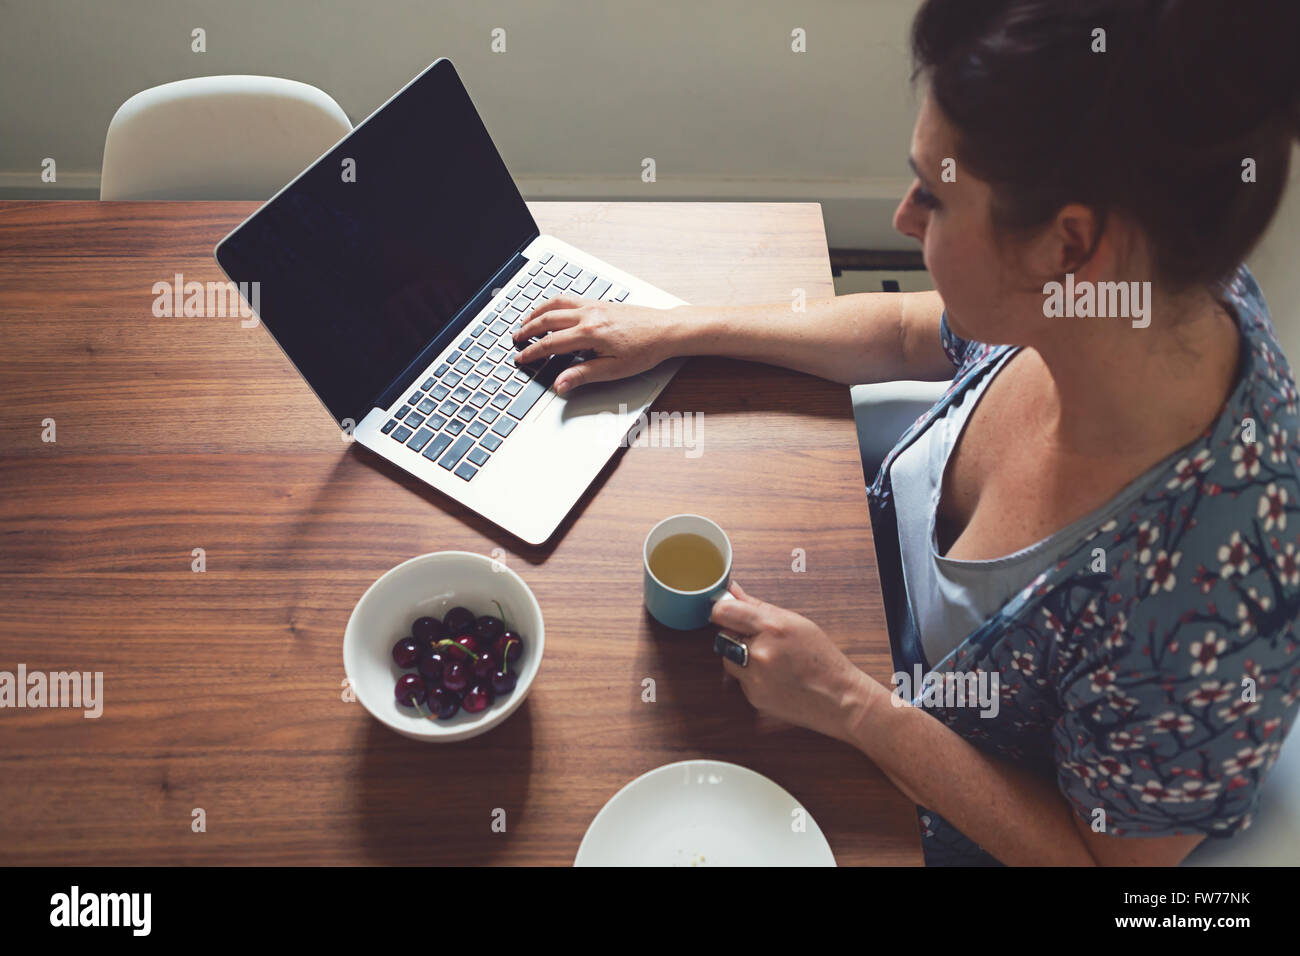 Horizontal overhead of woman working on computer at home with focus on the keyboard and blurred face Stock Photo